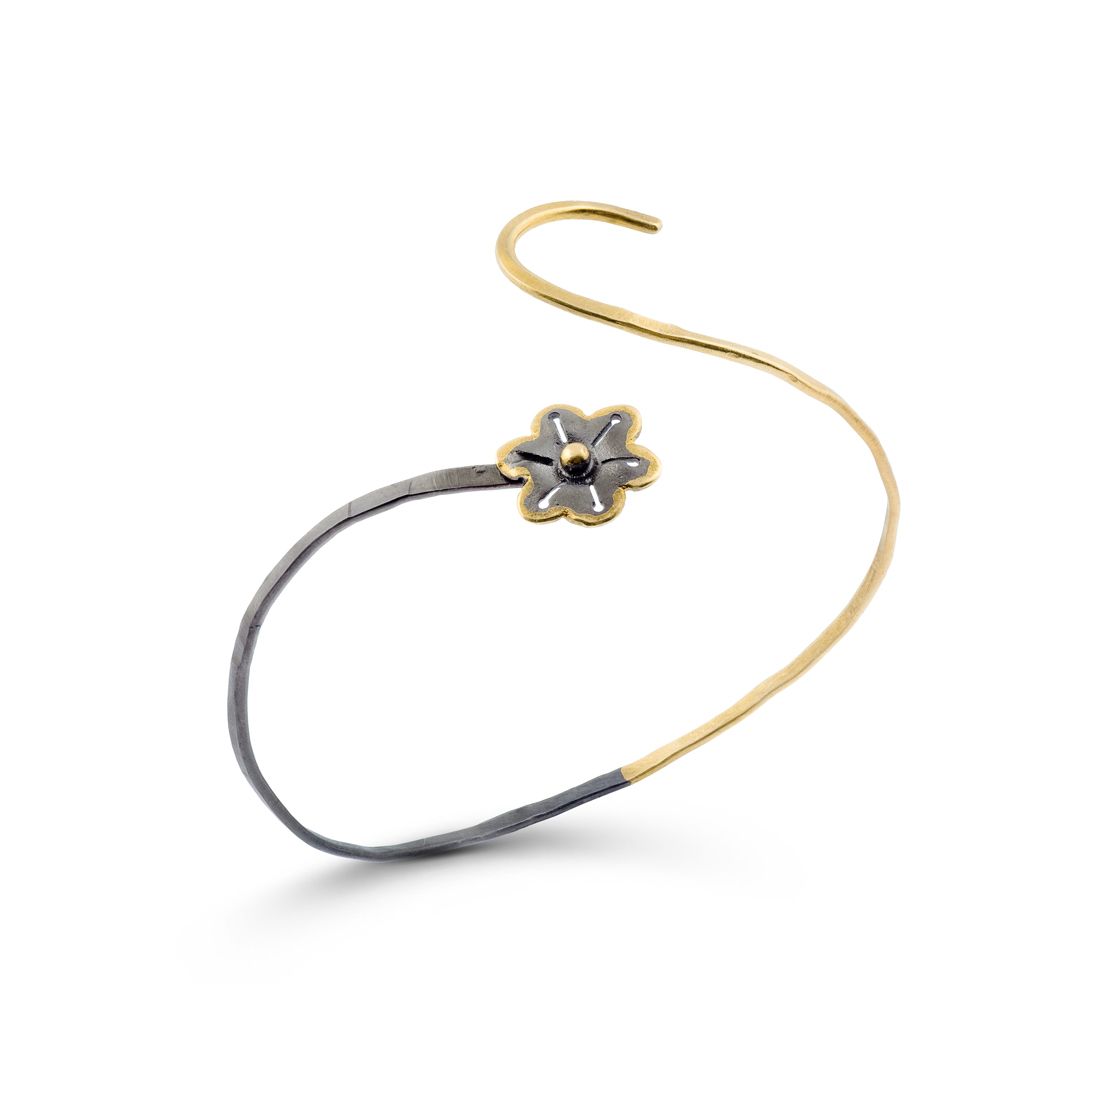 Black and gold daisy bookend a bi-colored gold wire adjustable bracelet.